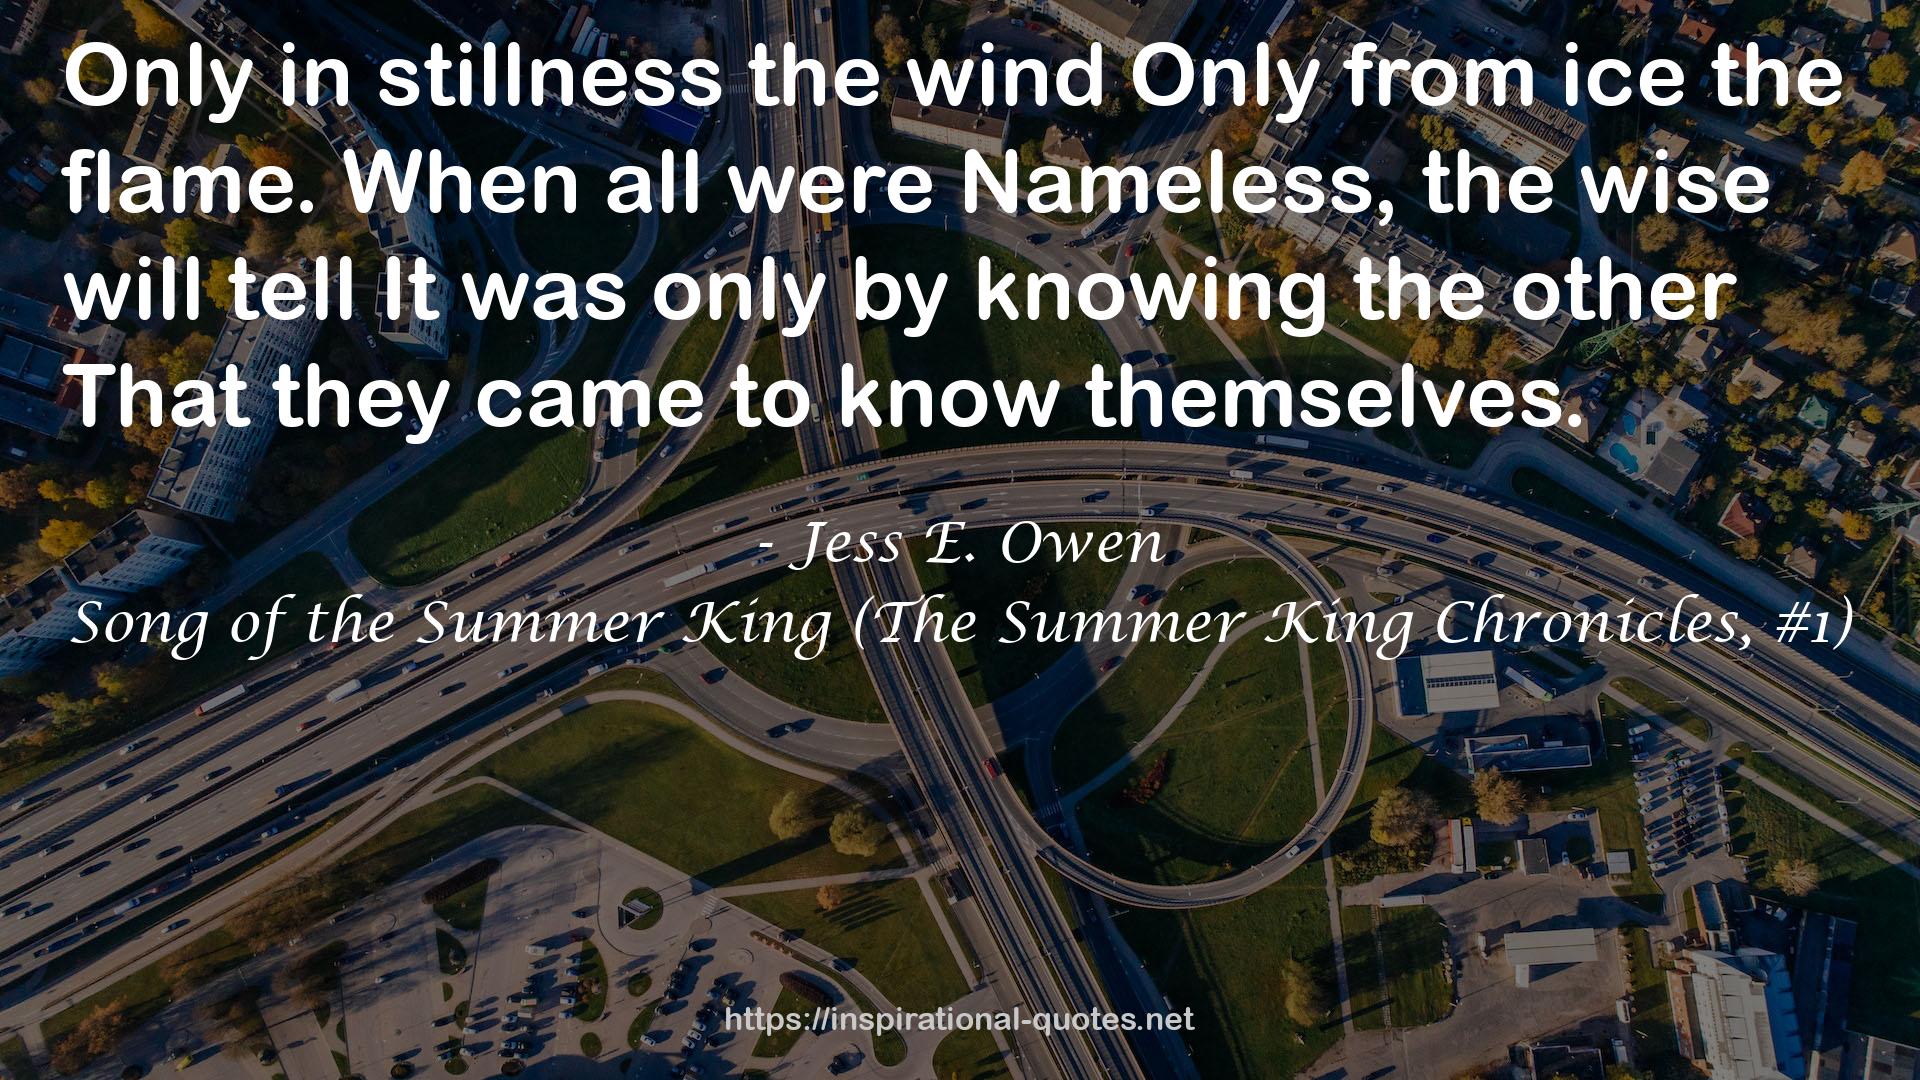 Song of the Summer King (The Summer King Chronicles, #1) QUOTES